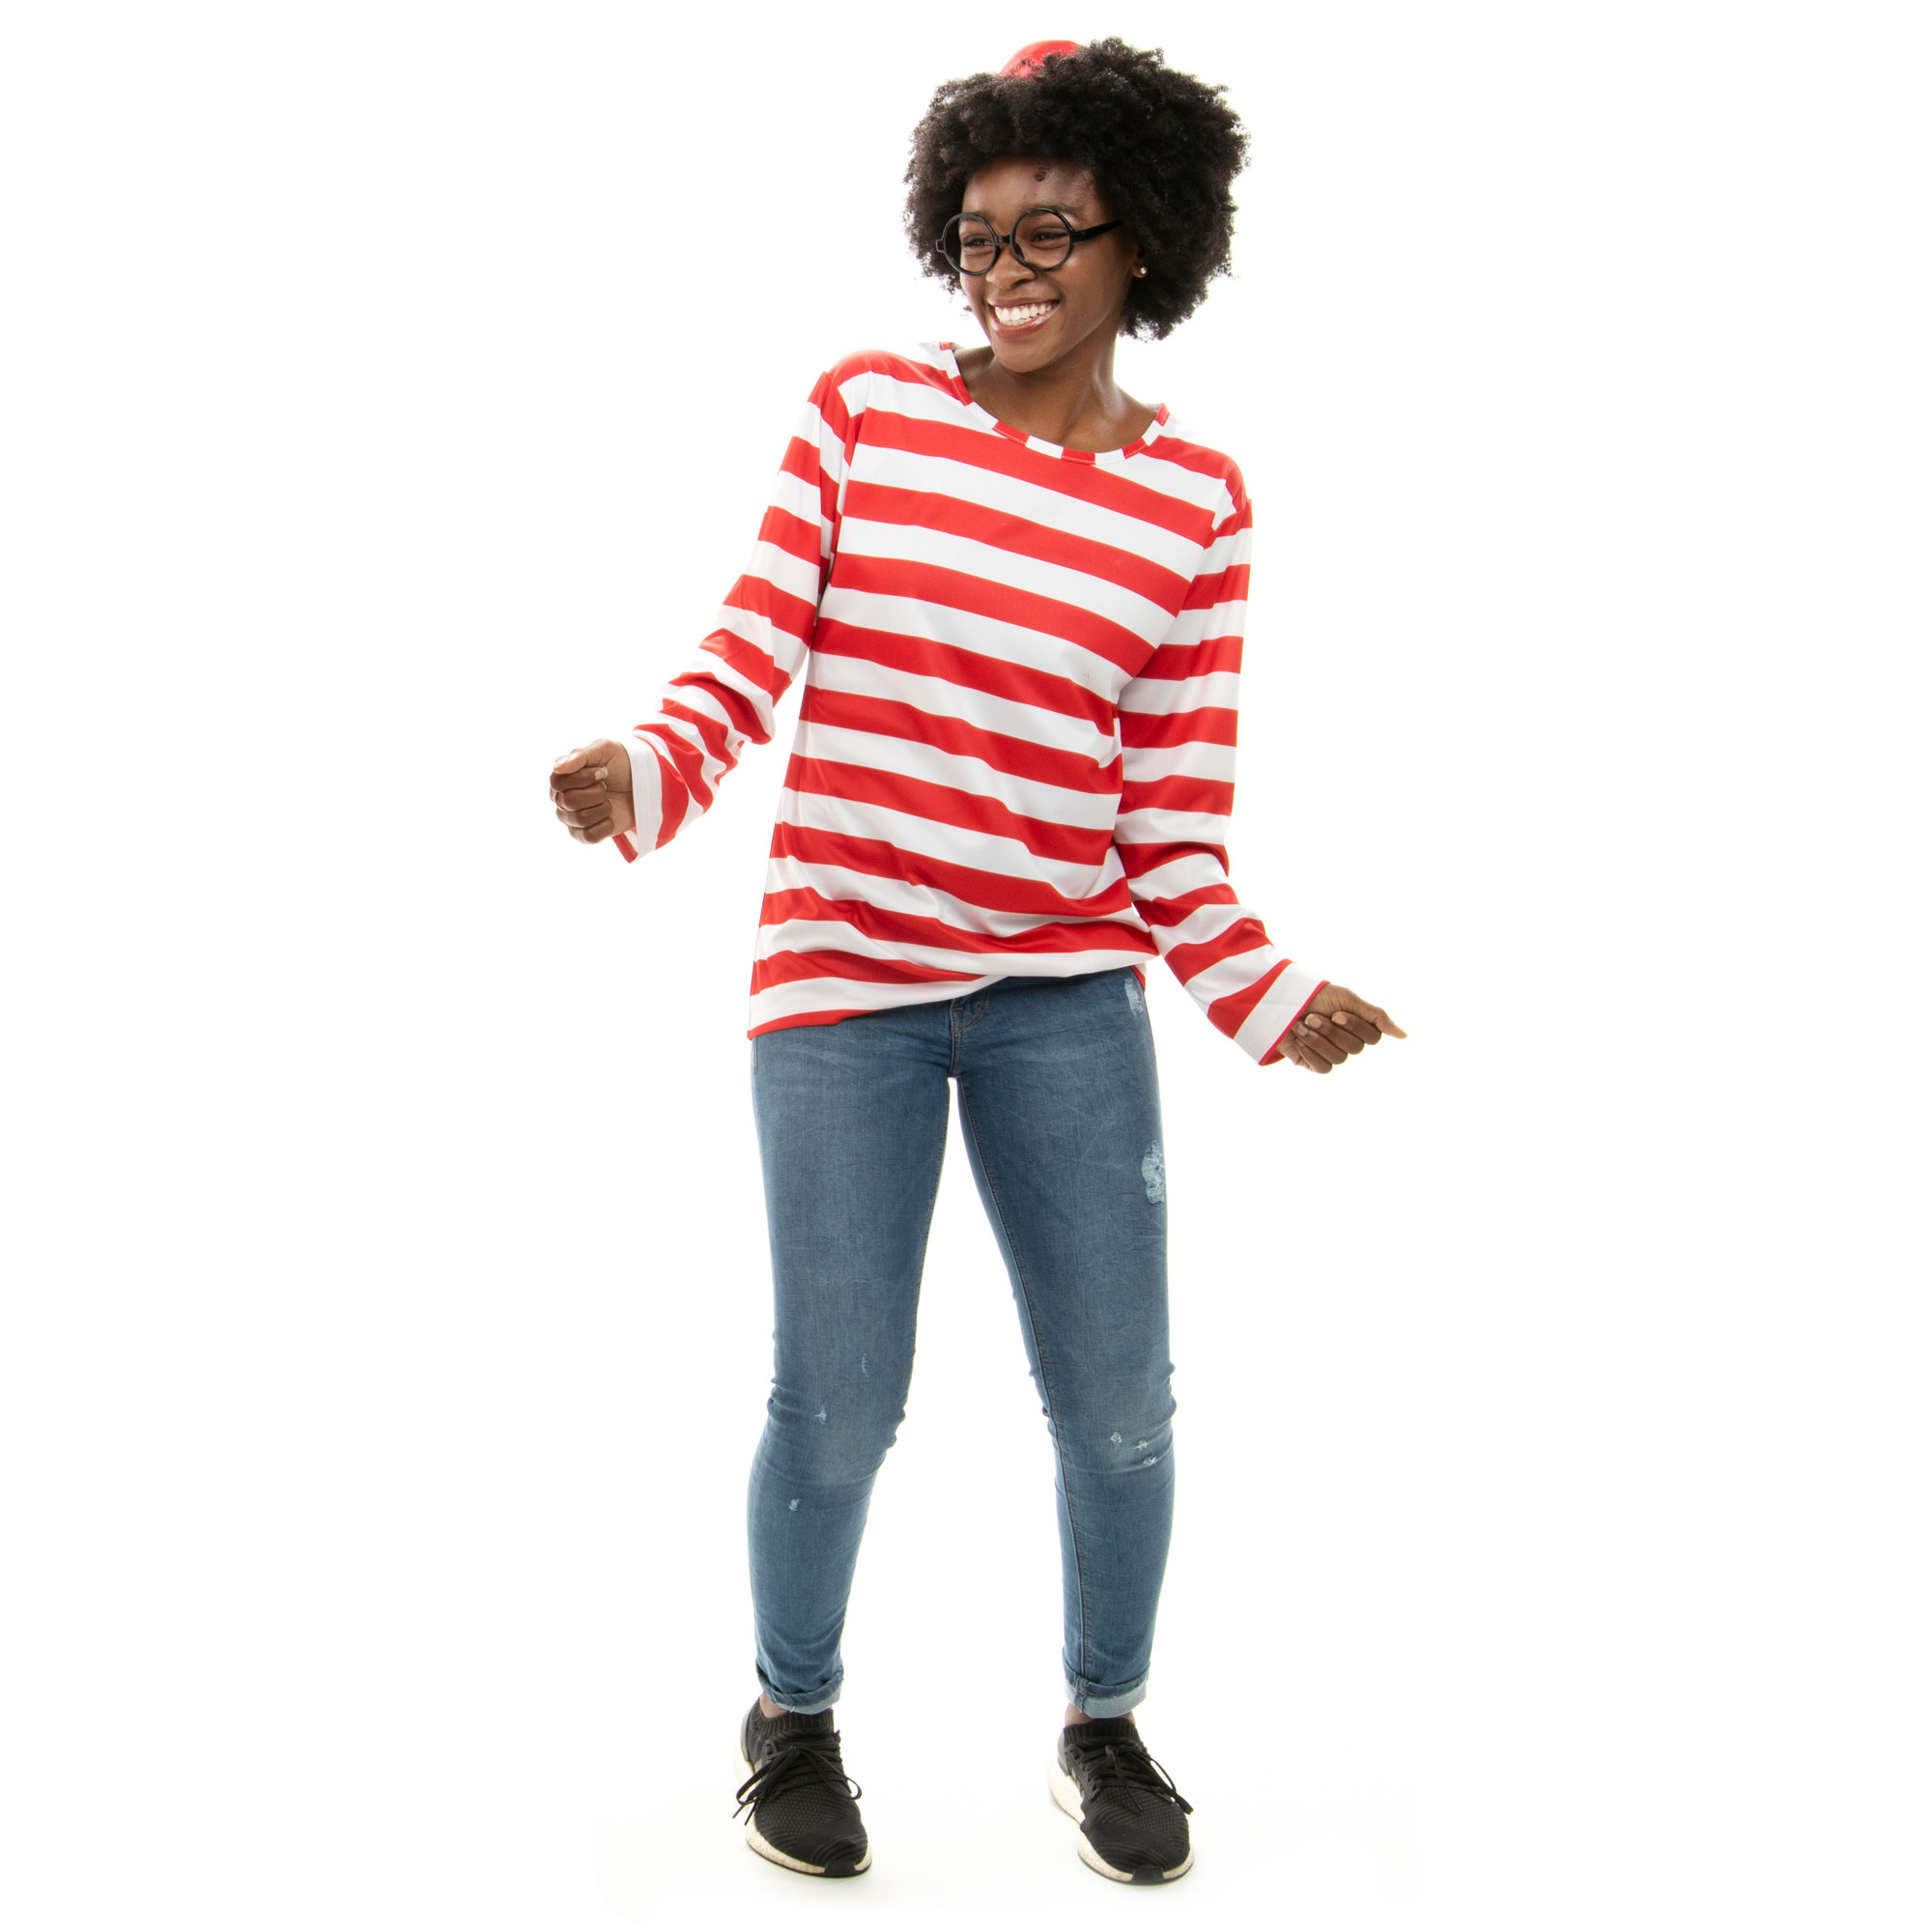 Where's Wally Halloween Costume - Women's Cosplay Outfit, M